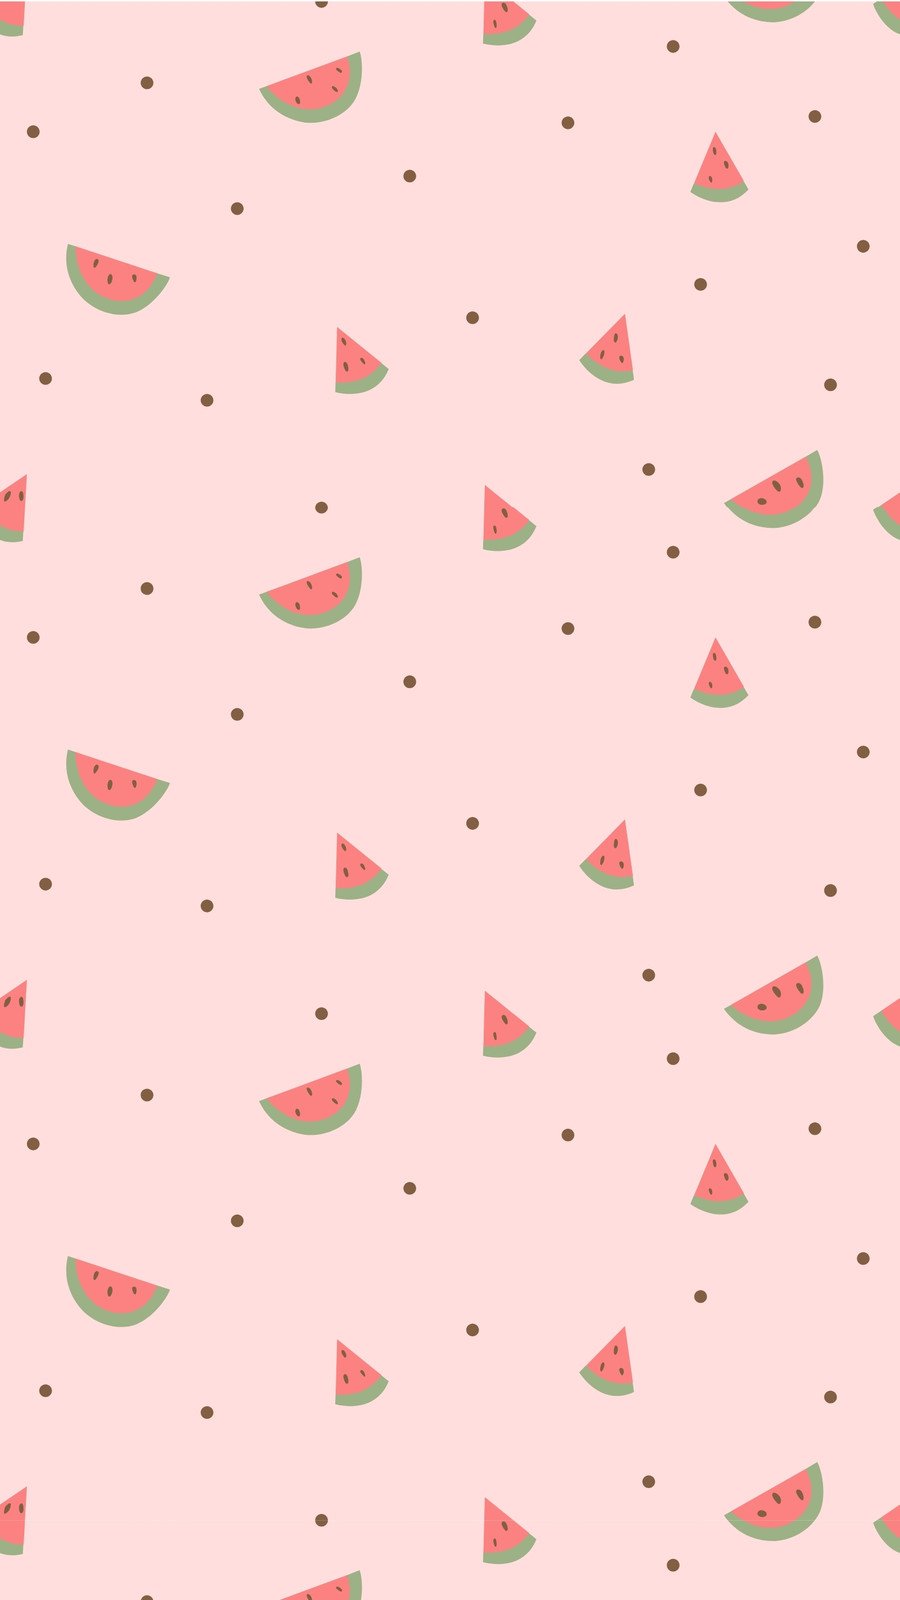 IPhone wallpaper with watermelon slices on a pink background - Watermelon